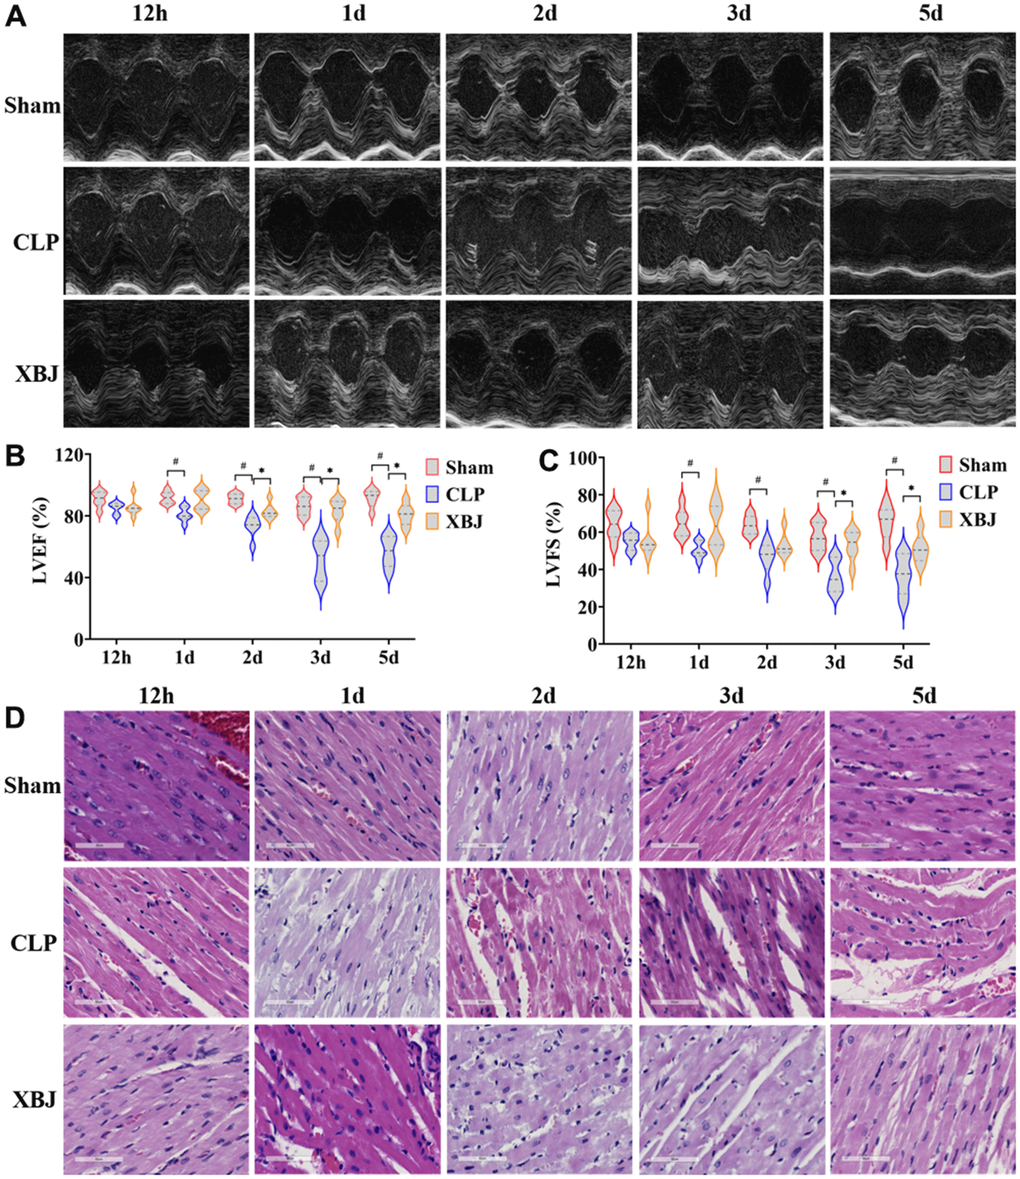 Effects of XBJ on sepsis-mediated myocardial dysfunction at 12h, 1d, 2d, 3d and 5d after CLP. (A) Representative echocardiographic images. (B, C) Quantification of LVEF, LVFS via echocardiography. (D) Histological analysis of heart via H&E staining (200×).